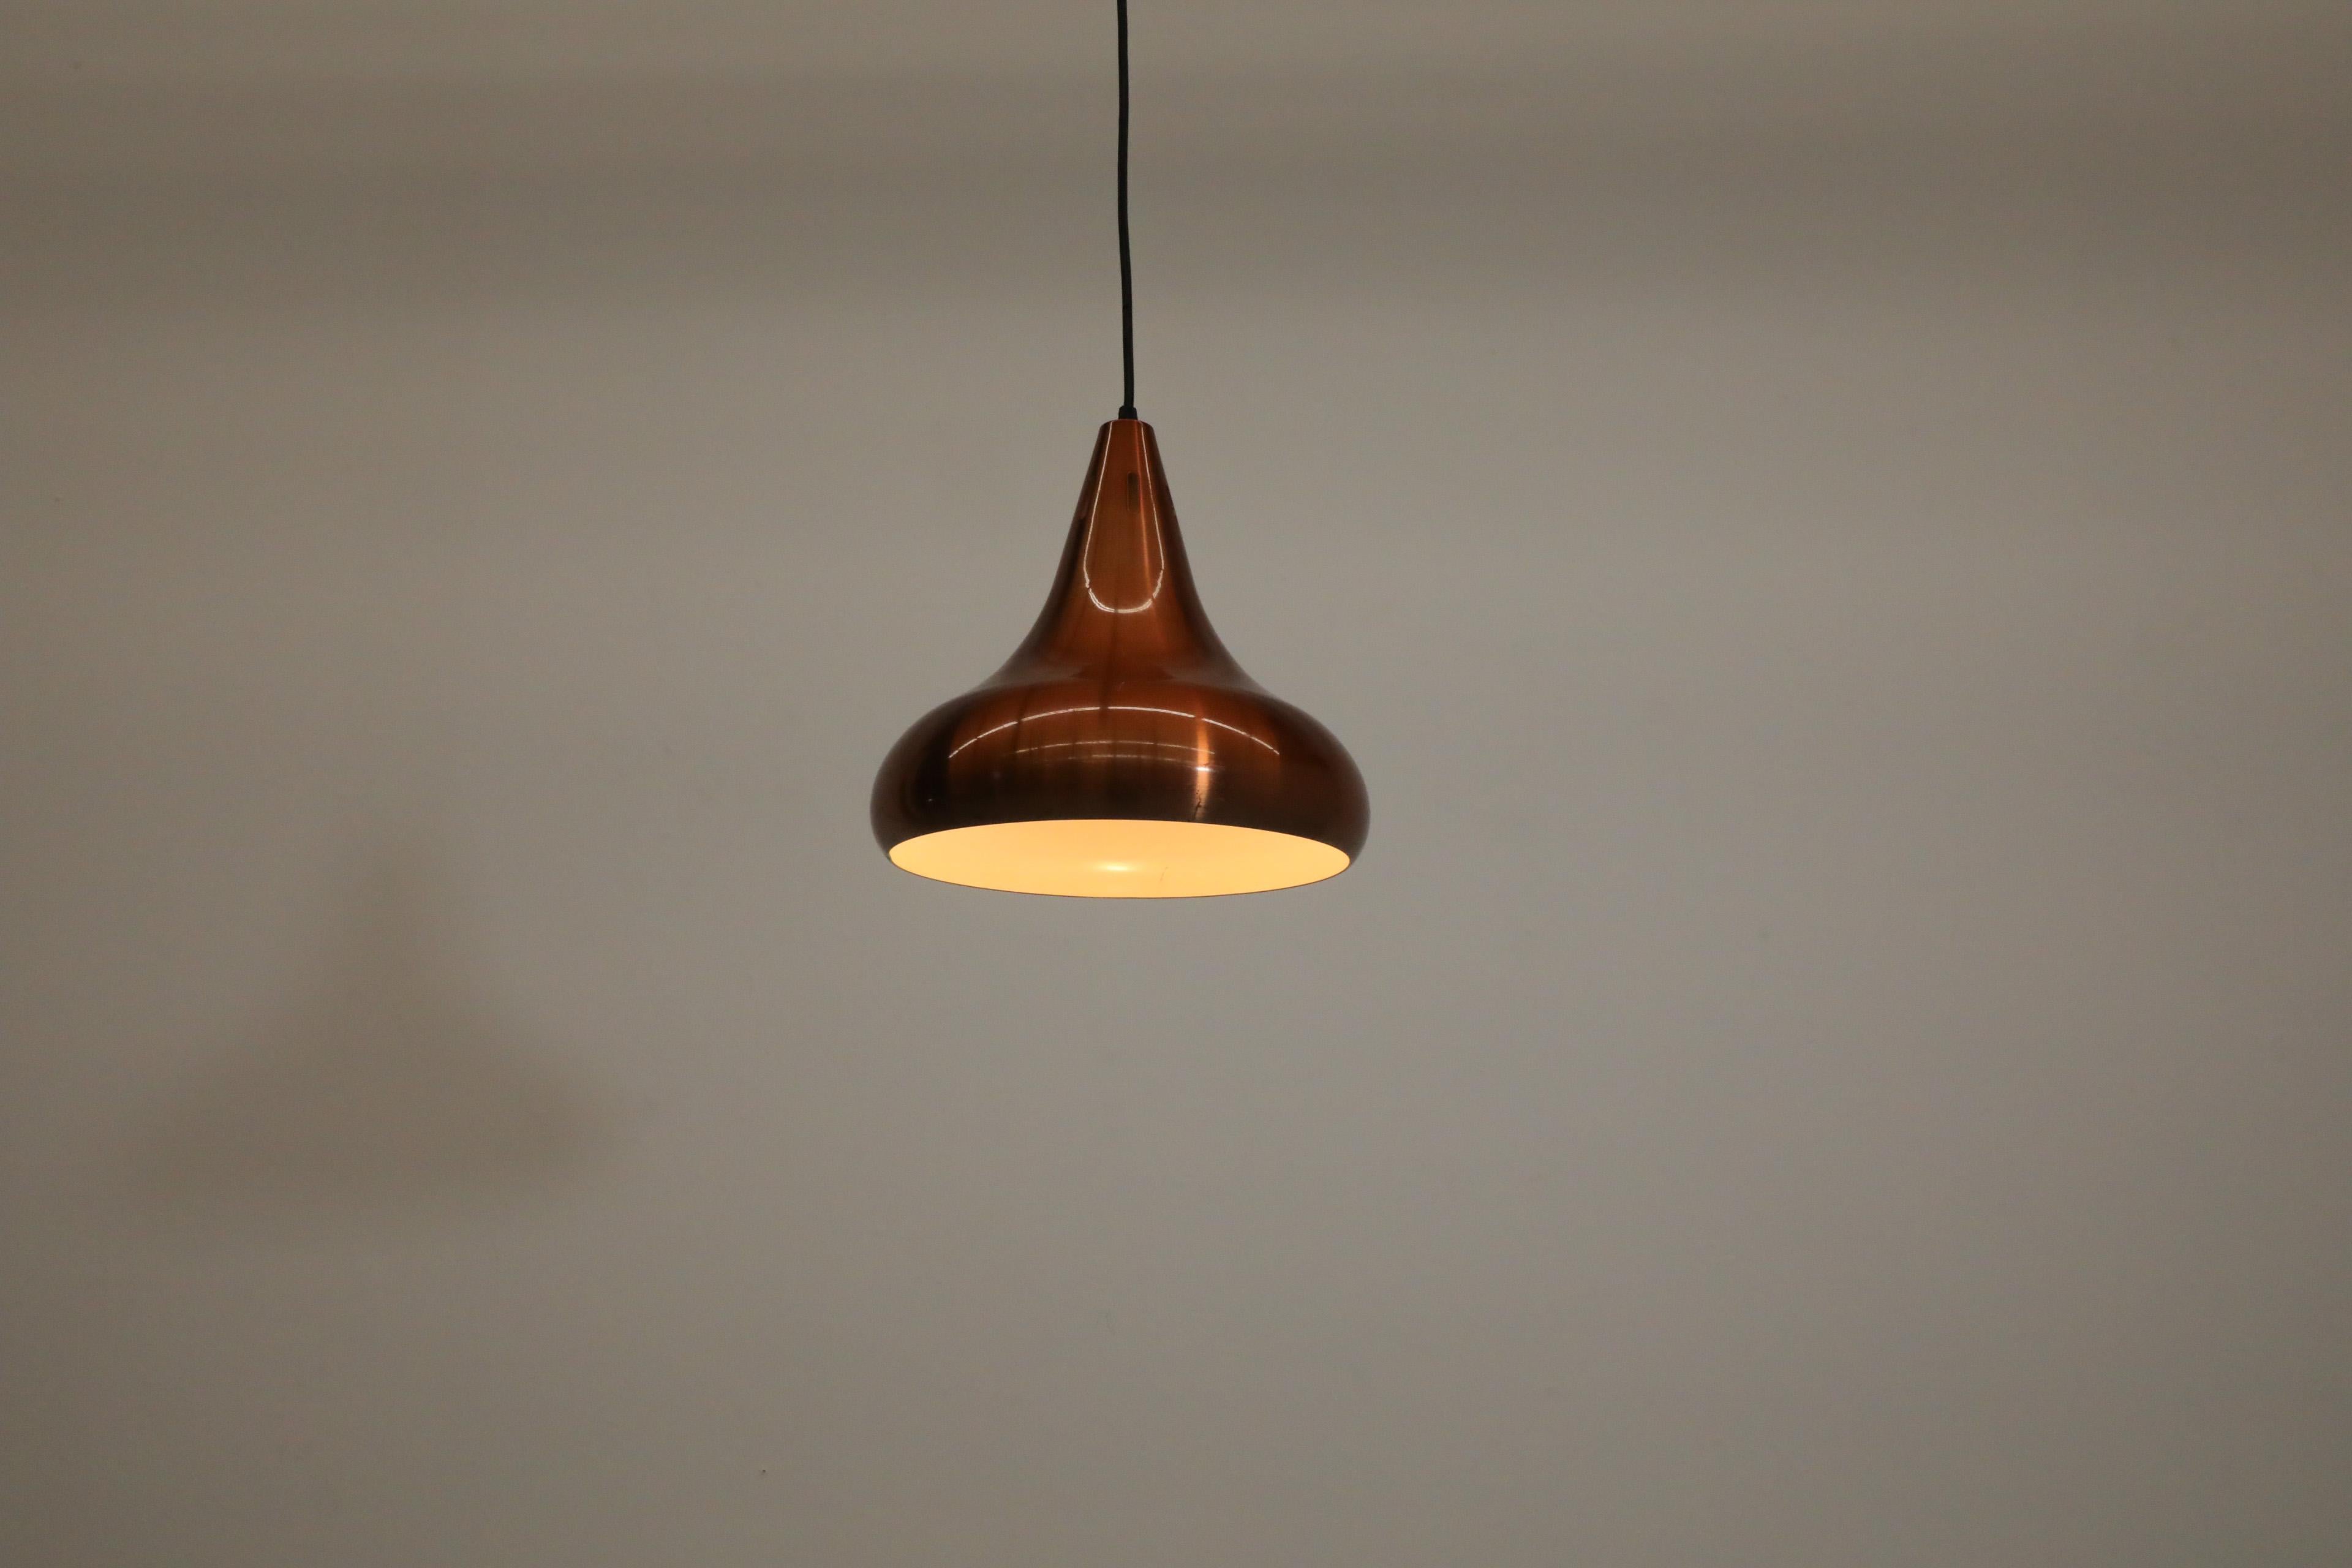 Mid-Century East German copper drop ceiling pendant by VEB Leuchtenbau, 1970s. 'VEB' or Volks Eigener Betrieb translates to Publicly-owned business and was the main legal form of industrial enterprise in communist East Germany. This Tom Dixon style